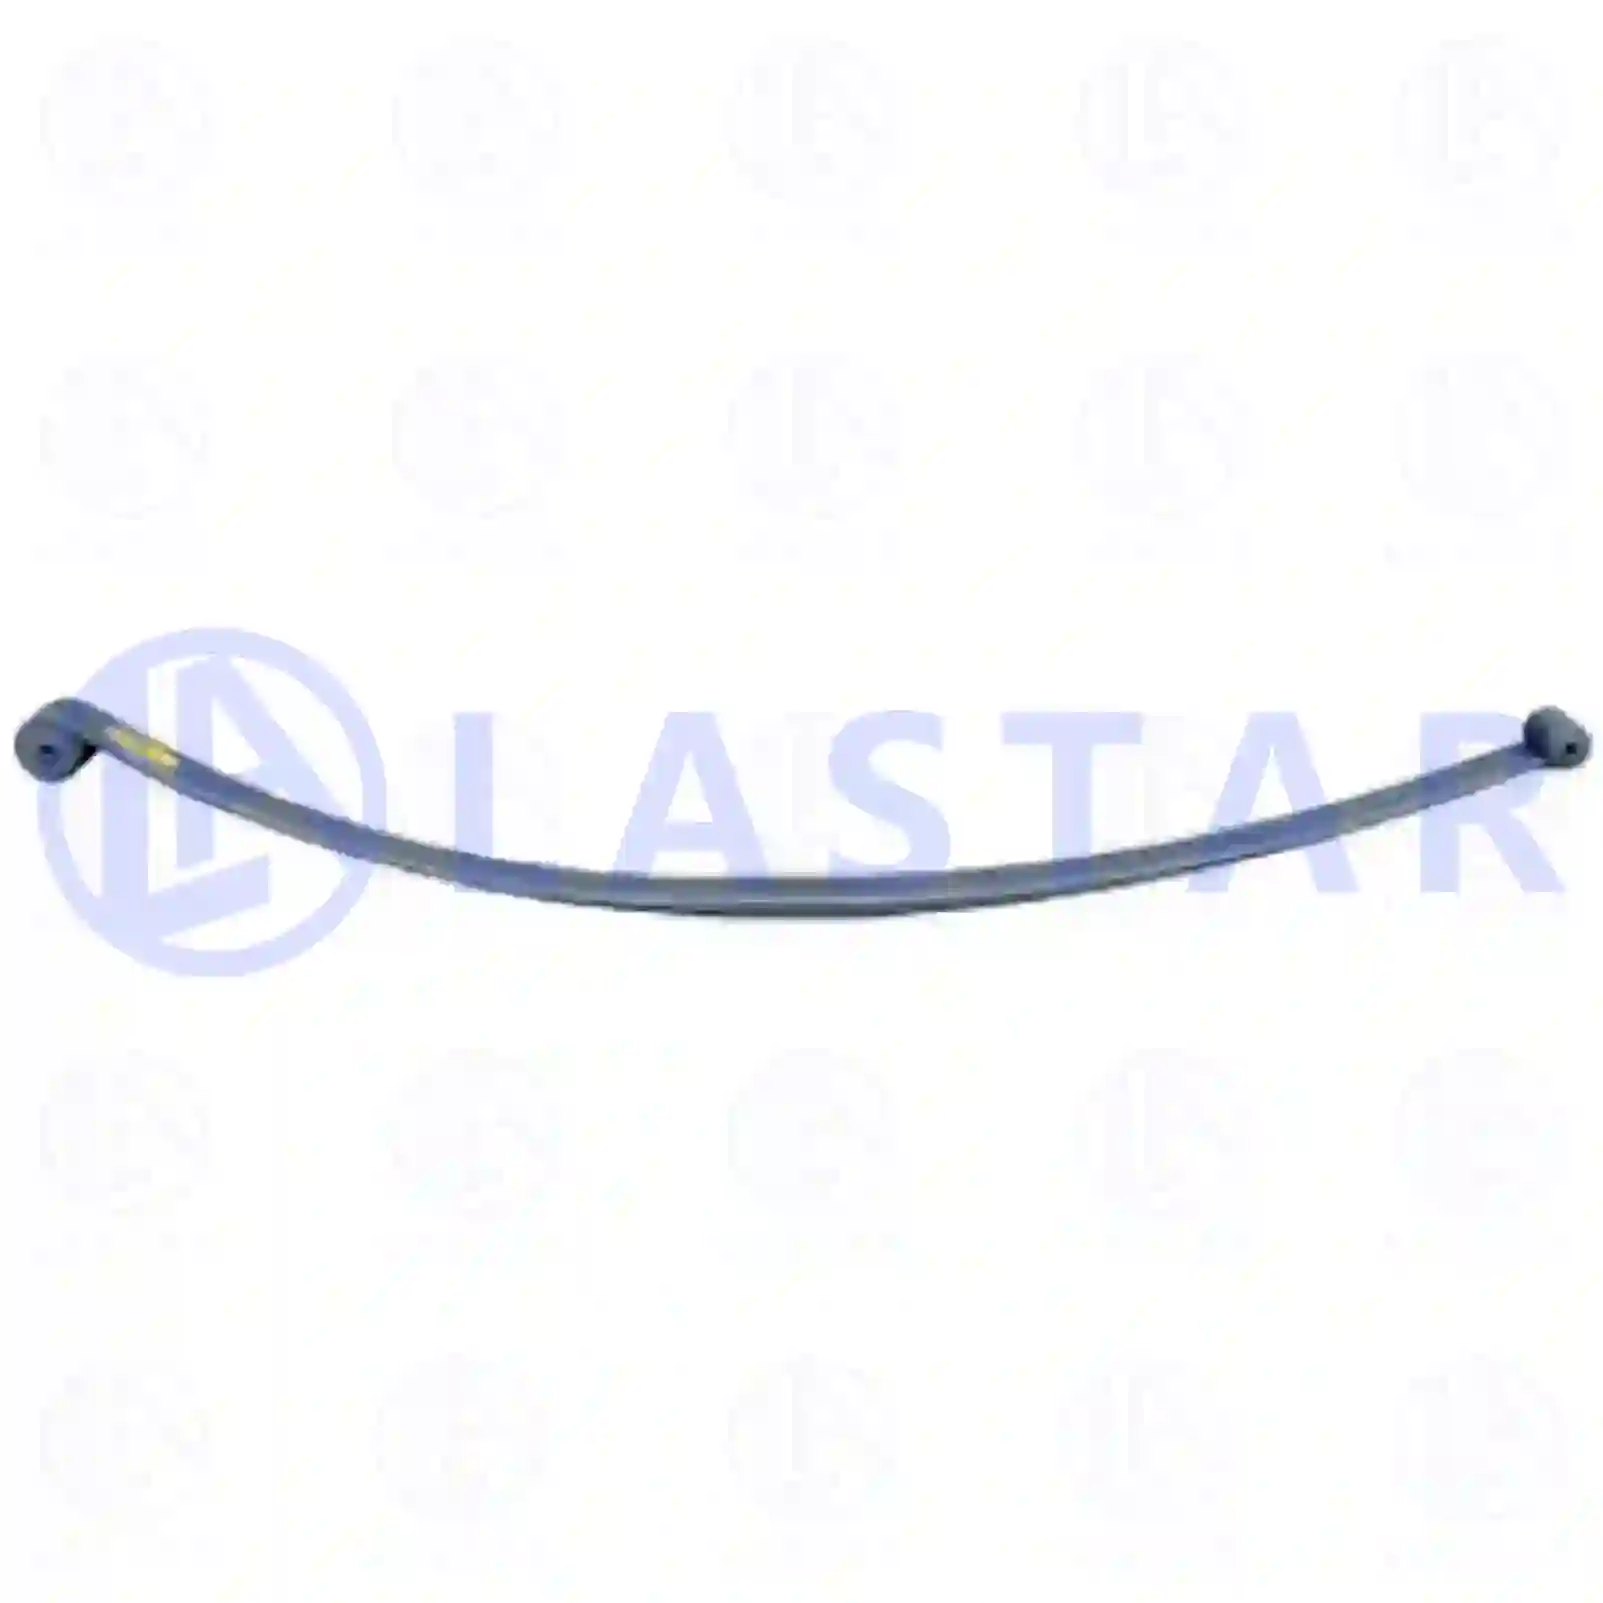 Leaf spring, 77728032, 9023201006, 9023201106, 9023201506, 2D0511131AD ||  77728032 Lastar Spare Part | Truck Spare Parts, Auotomotive Spare Parts Leaf spring, 77728032, 9023201006, 9023201106, 9023201506, 2D0511131AD ||  77728032 Lastar Spare Part | Truck Spare Parts, Auotomotive Spare Parts